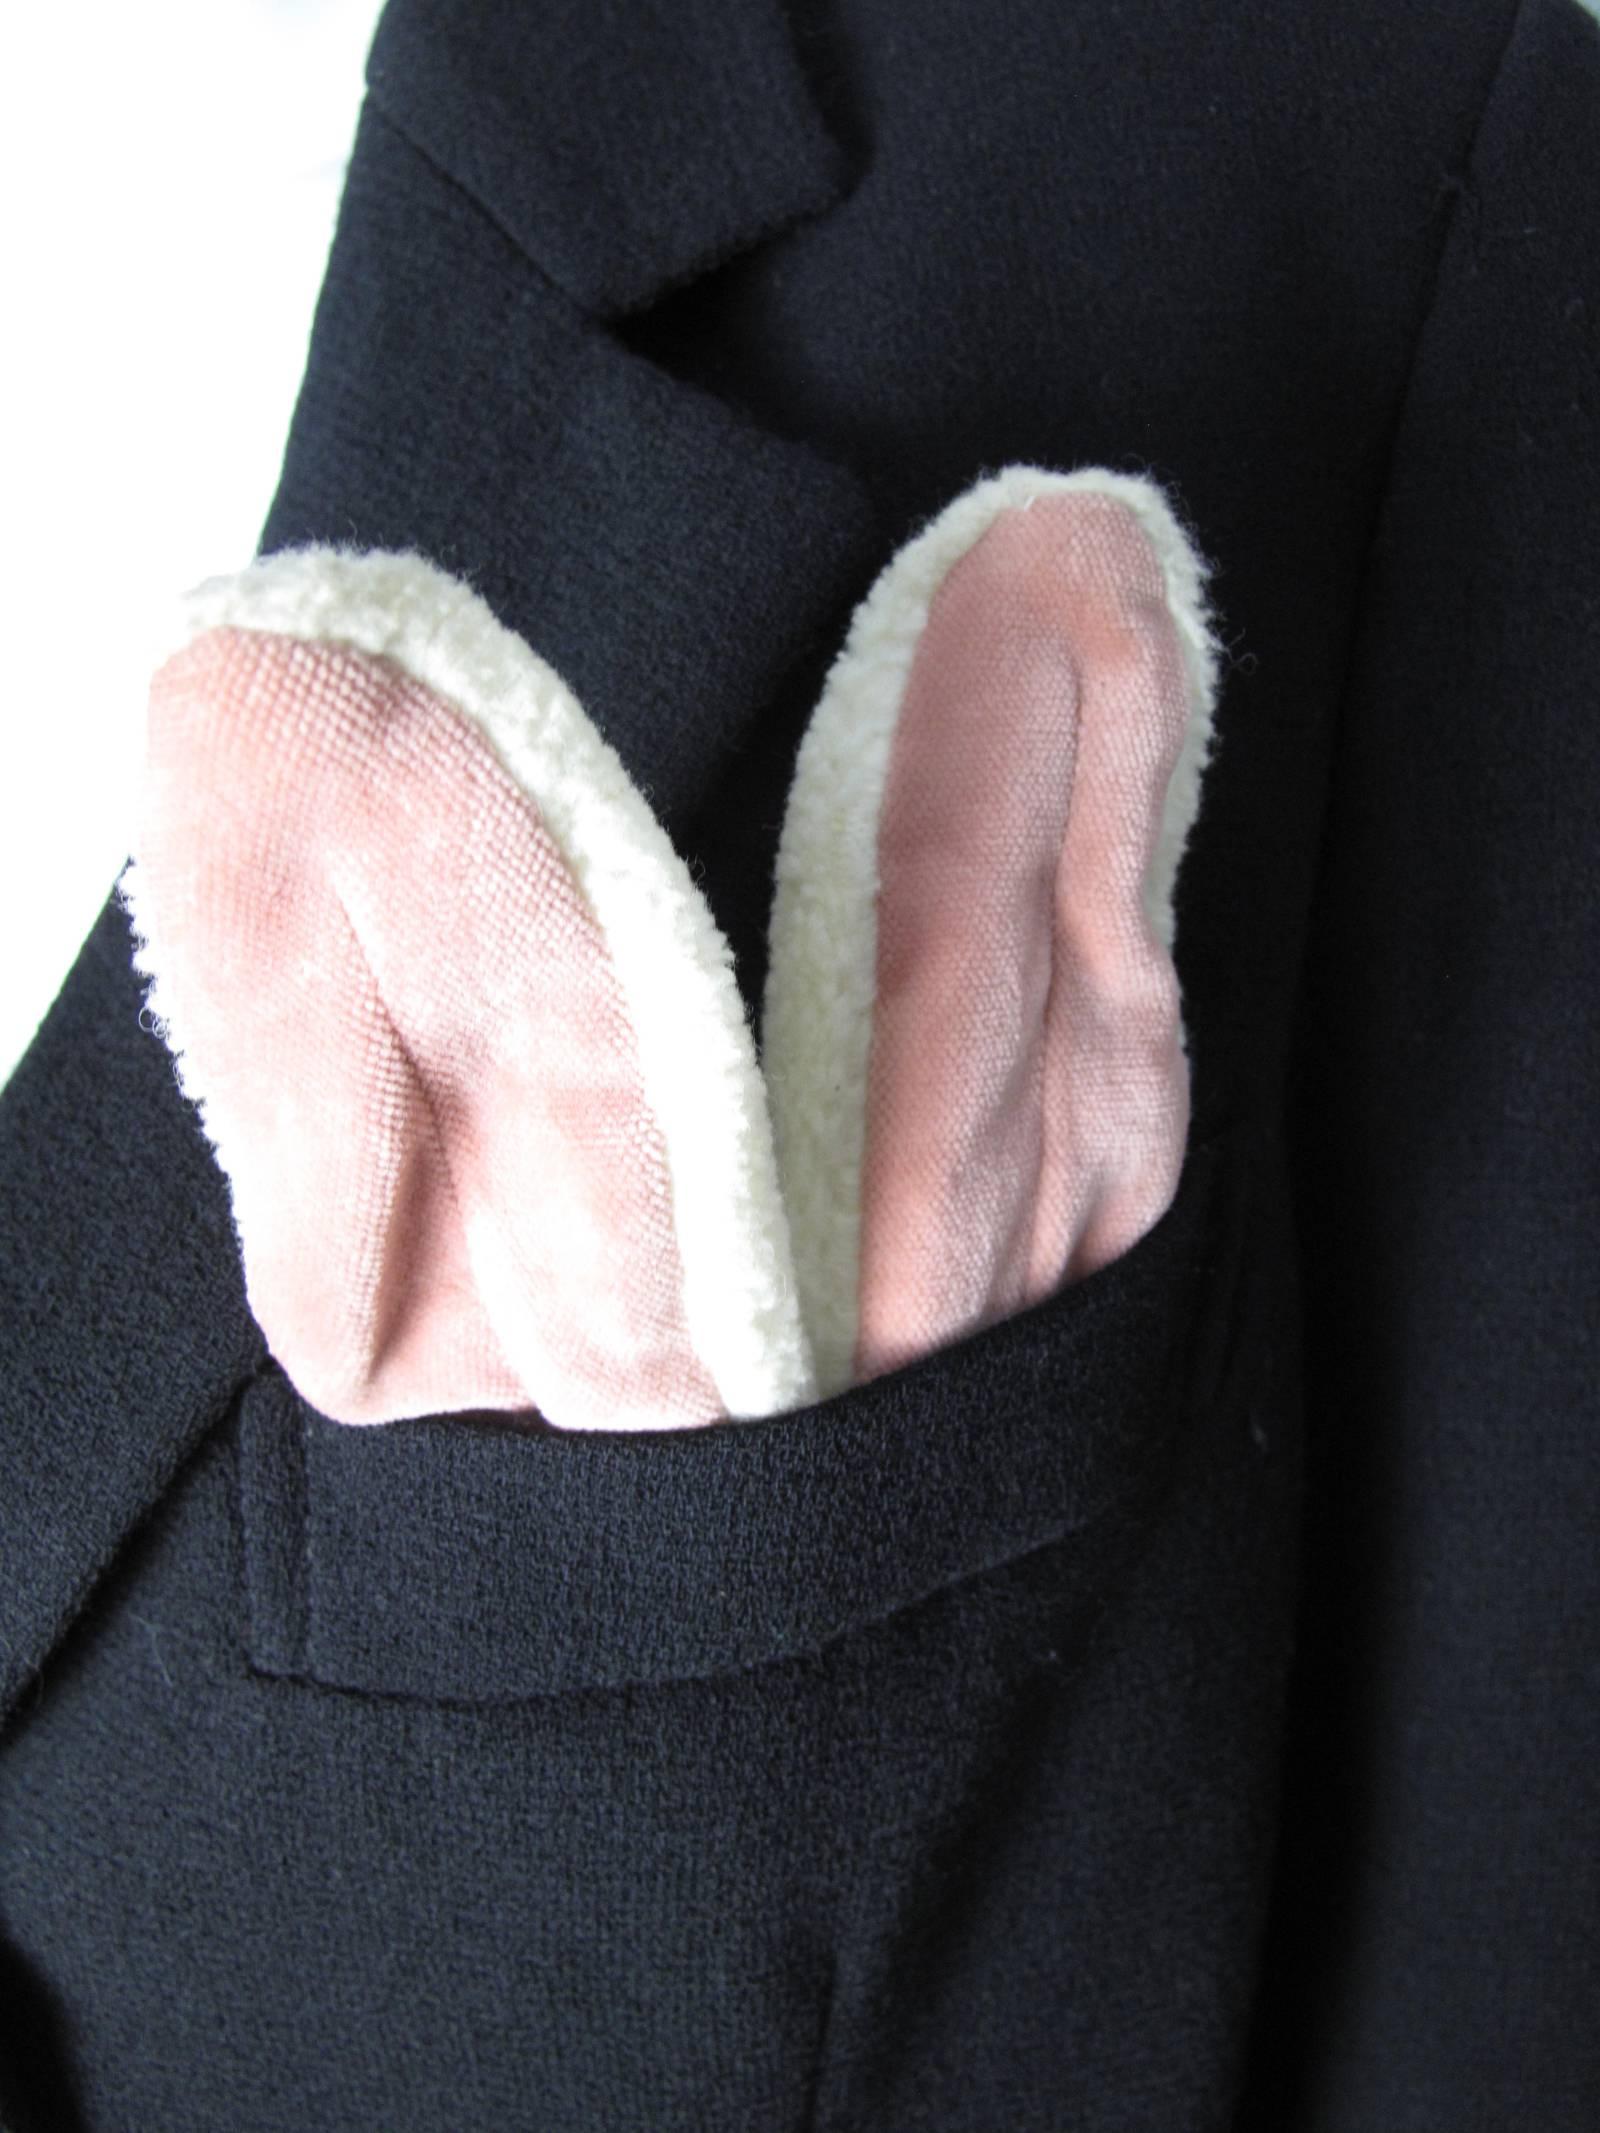 Moschino black wool blazer with rabbit ears in the pocket and fluffy tail on back.  Condition: Very good.  labeled Size 12 ( mannequin is a size 6 ) 
40